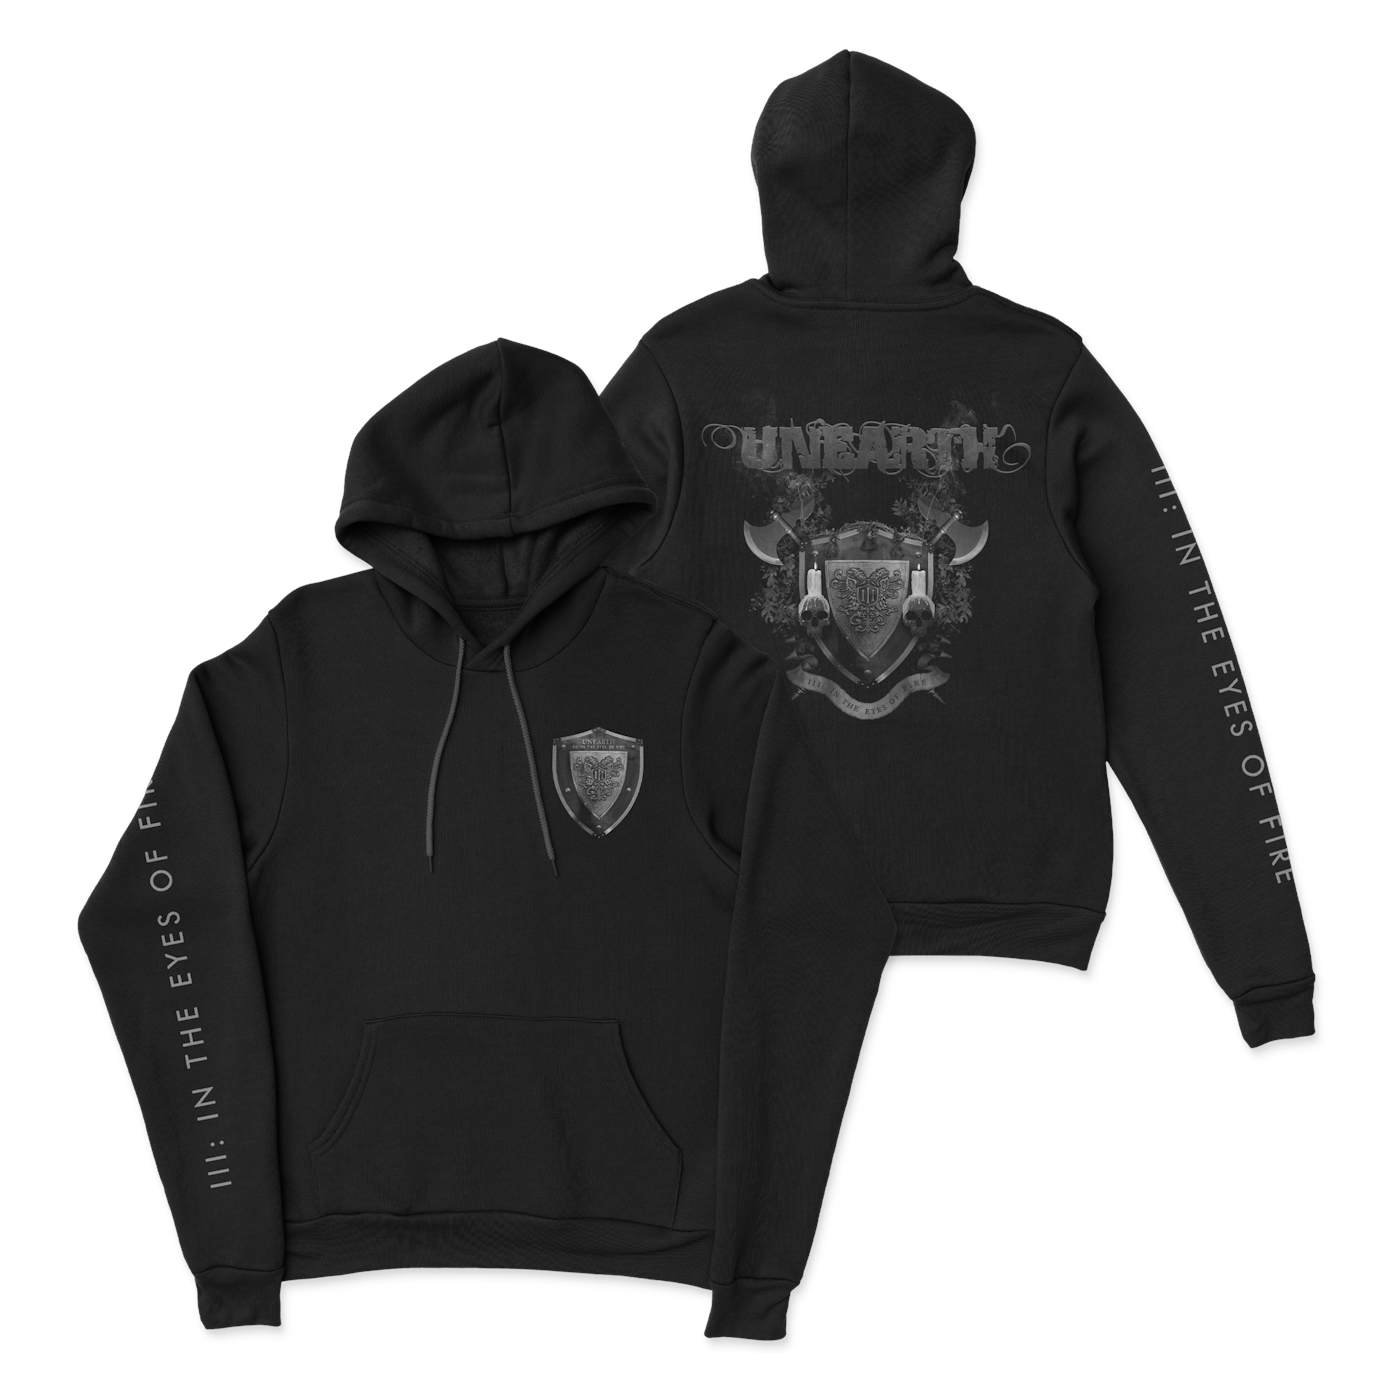 Unearth III - In the Eyes of Fire Hoodie